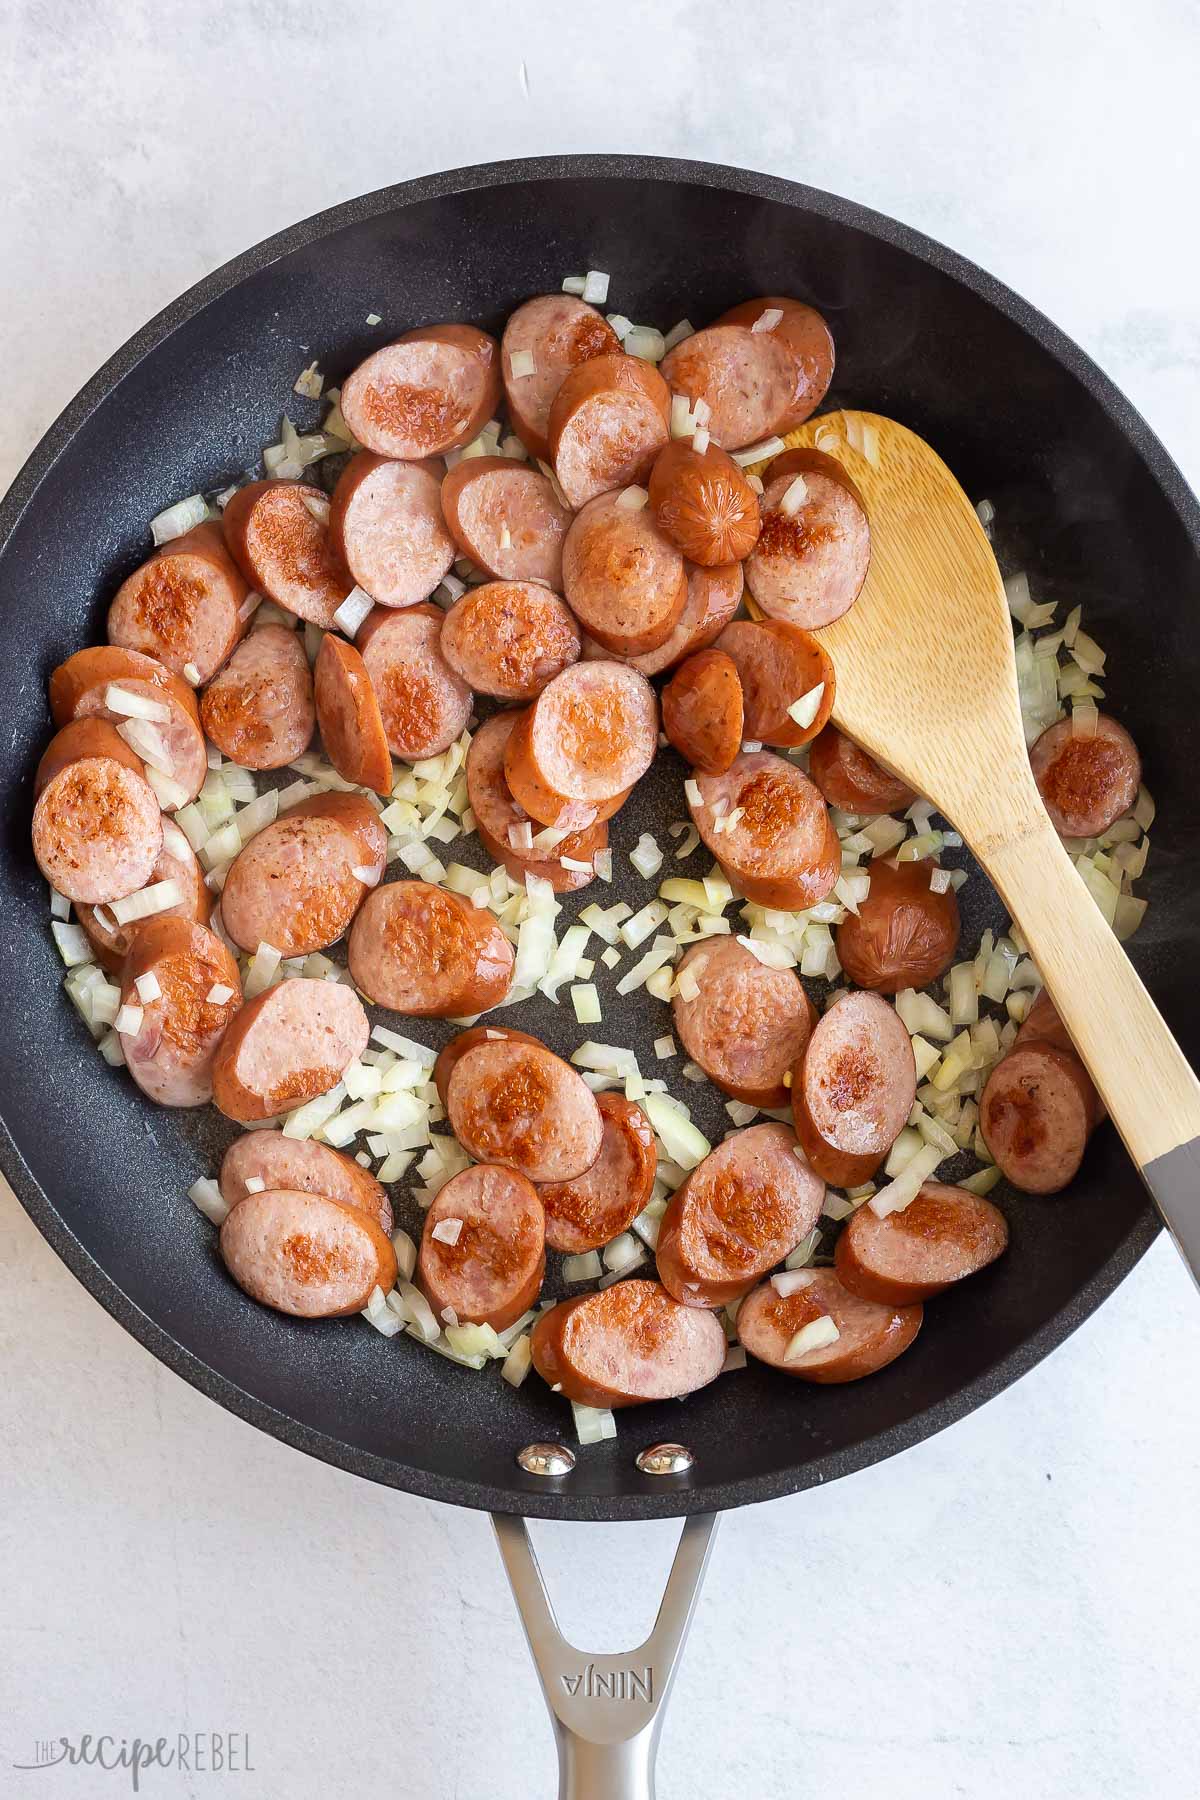 onion added to smoked sausage in skillet.